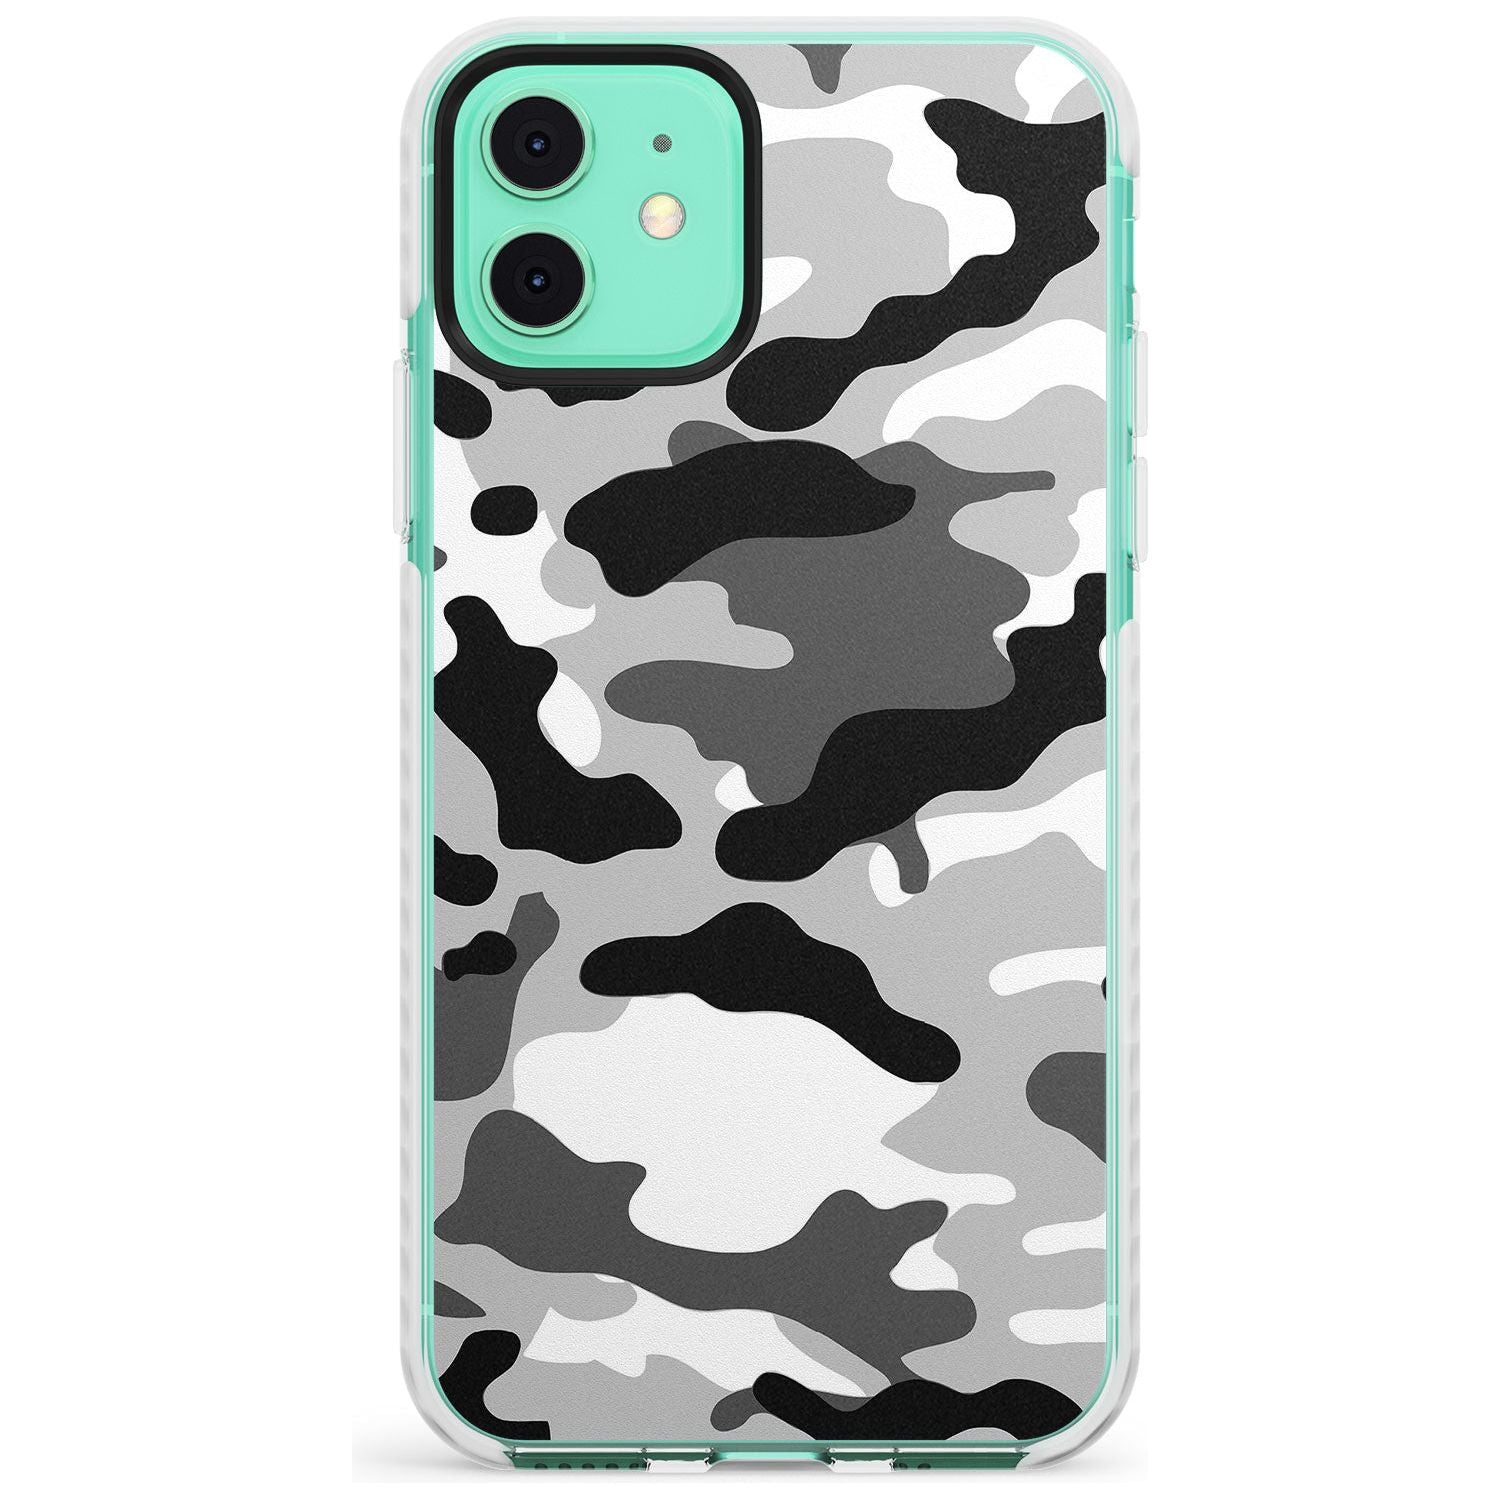 Grey Camo Impact Phone Case for iPhone 11